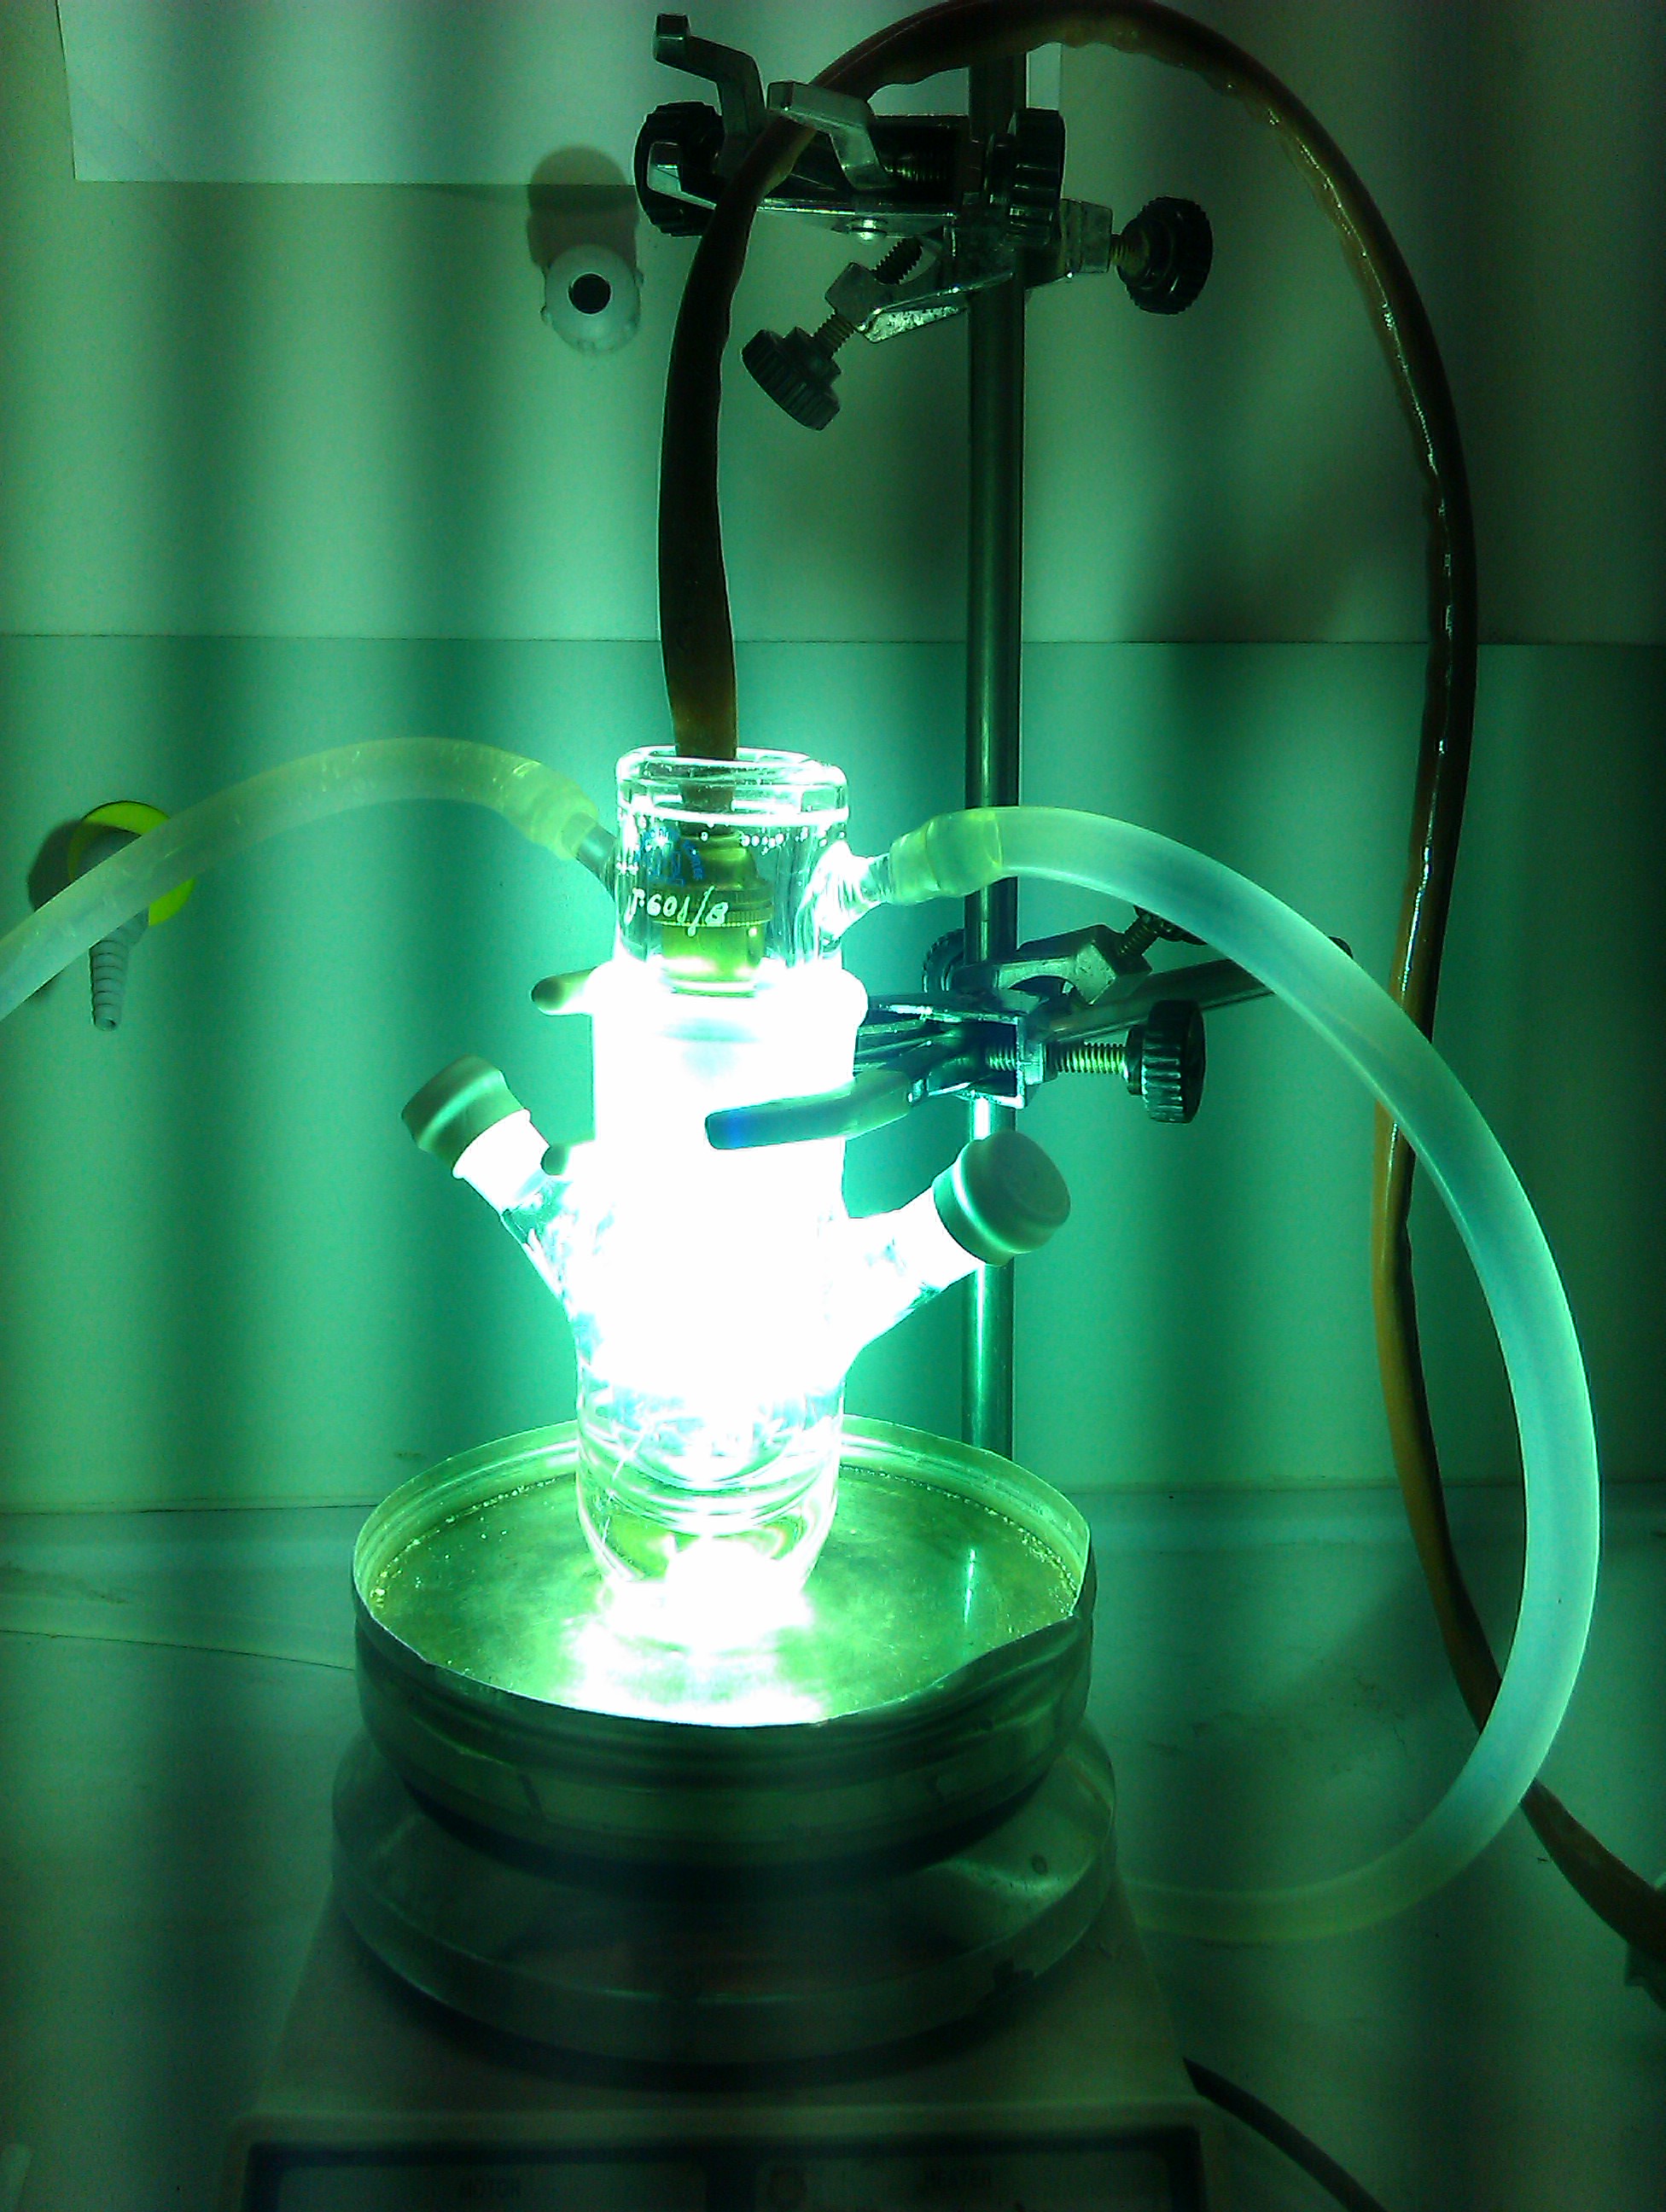 The Development of Renewable Energy Sources Through the Study of Photochemistry